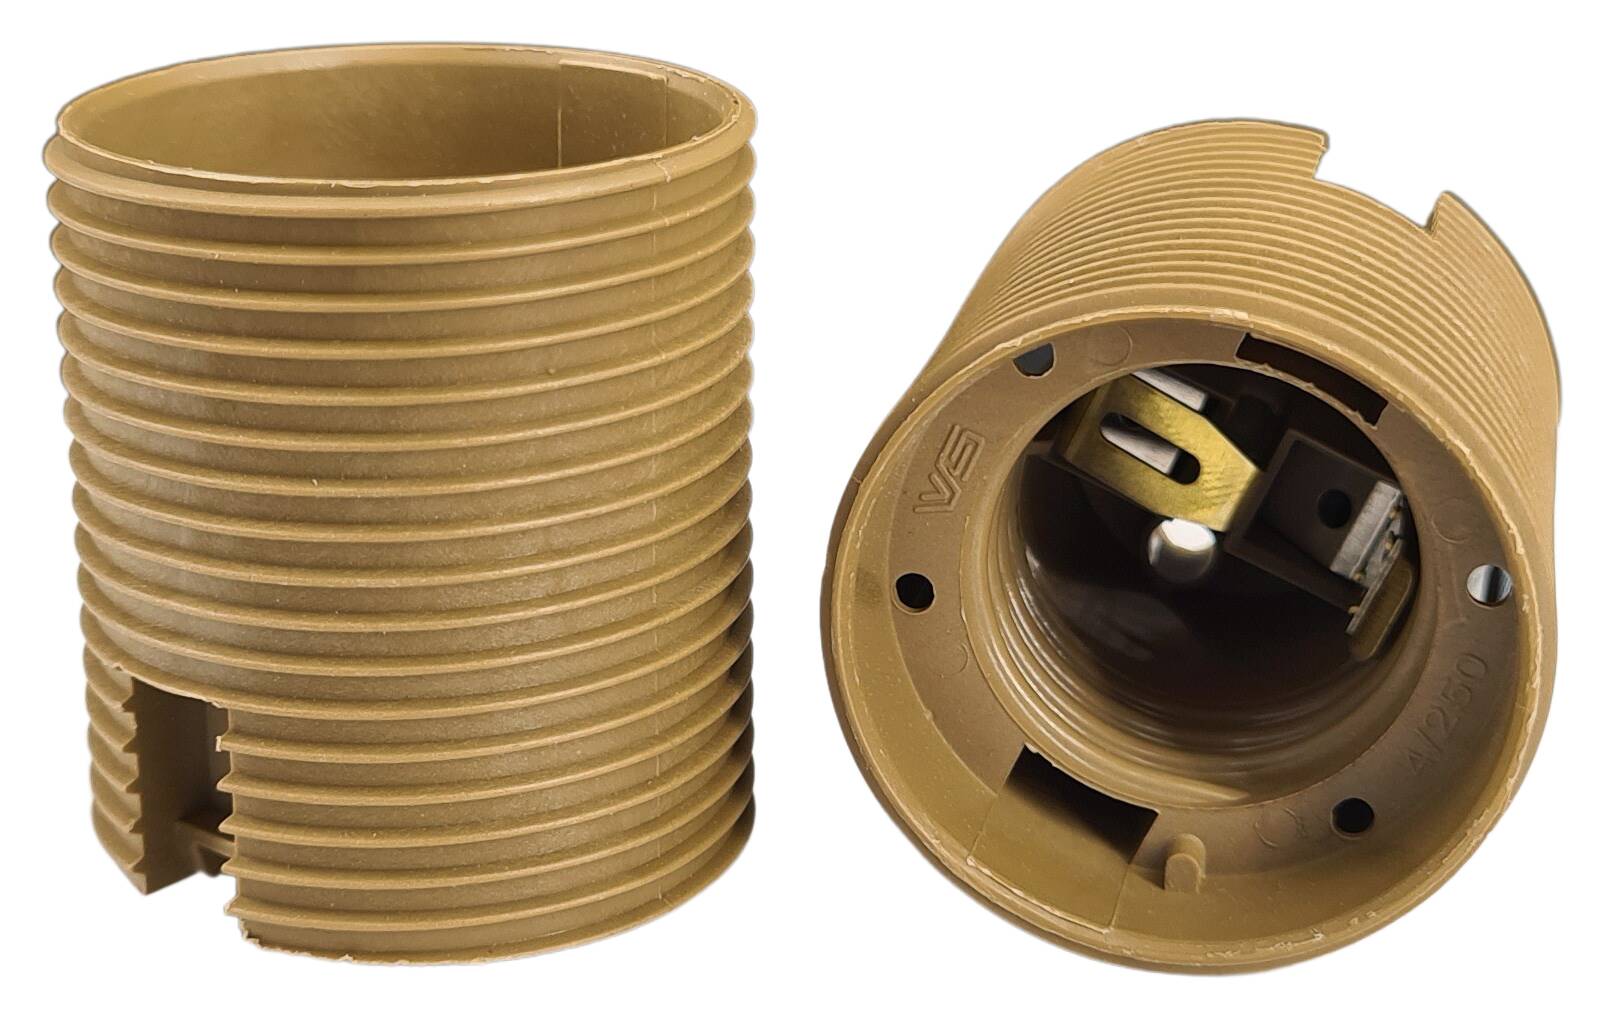 E27 threaded for thermoplastic lampholder gold